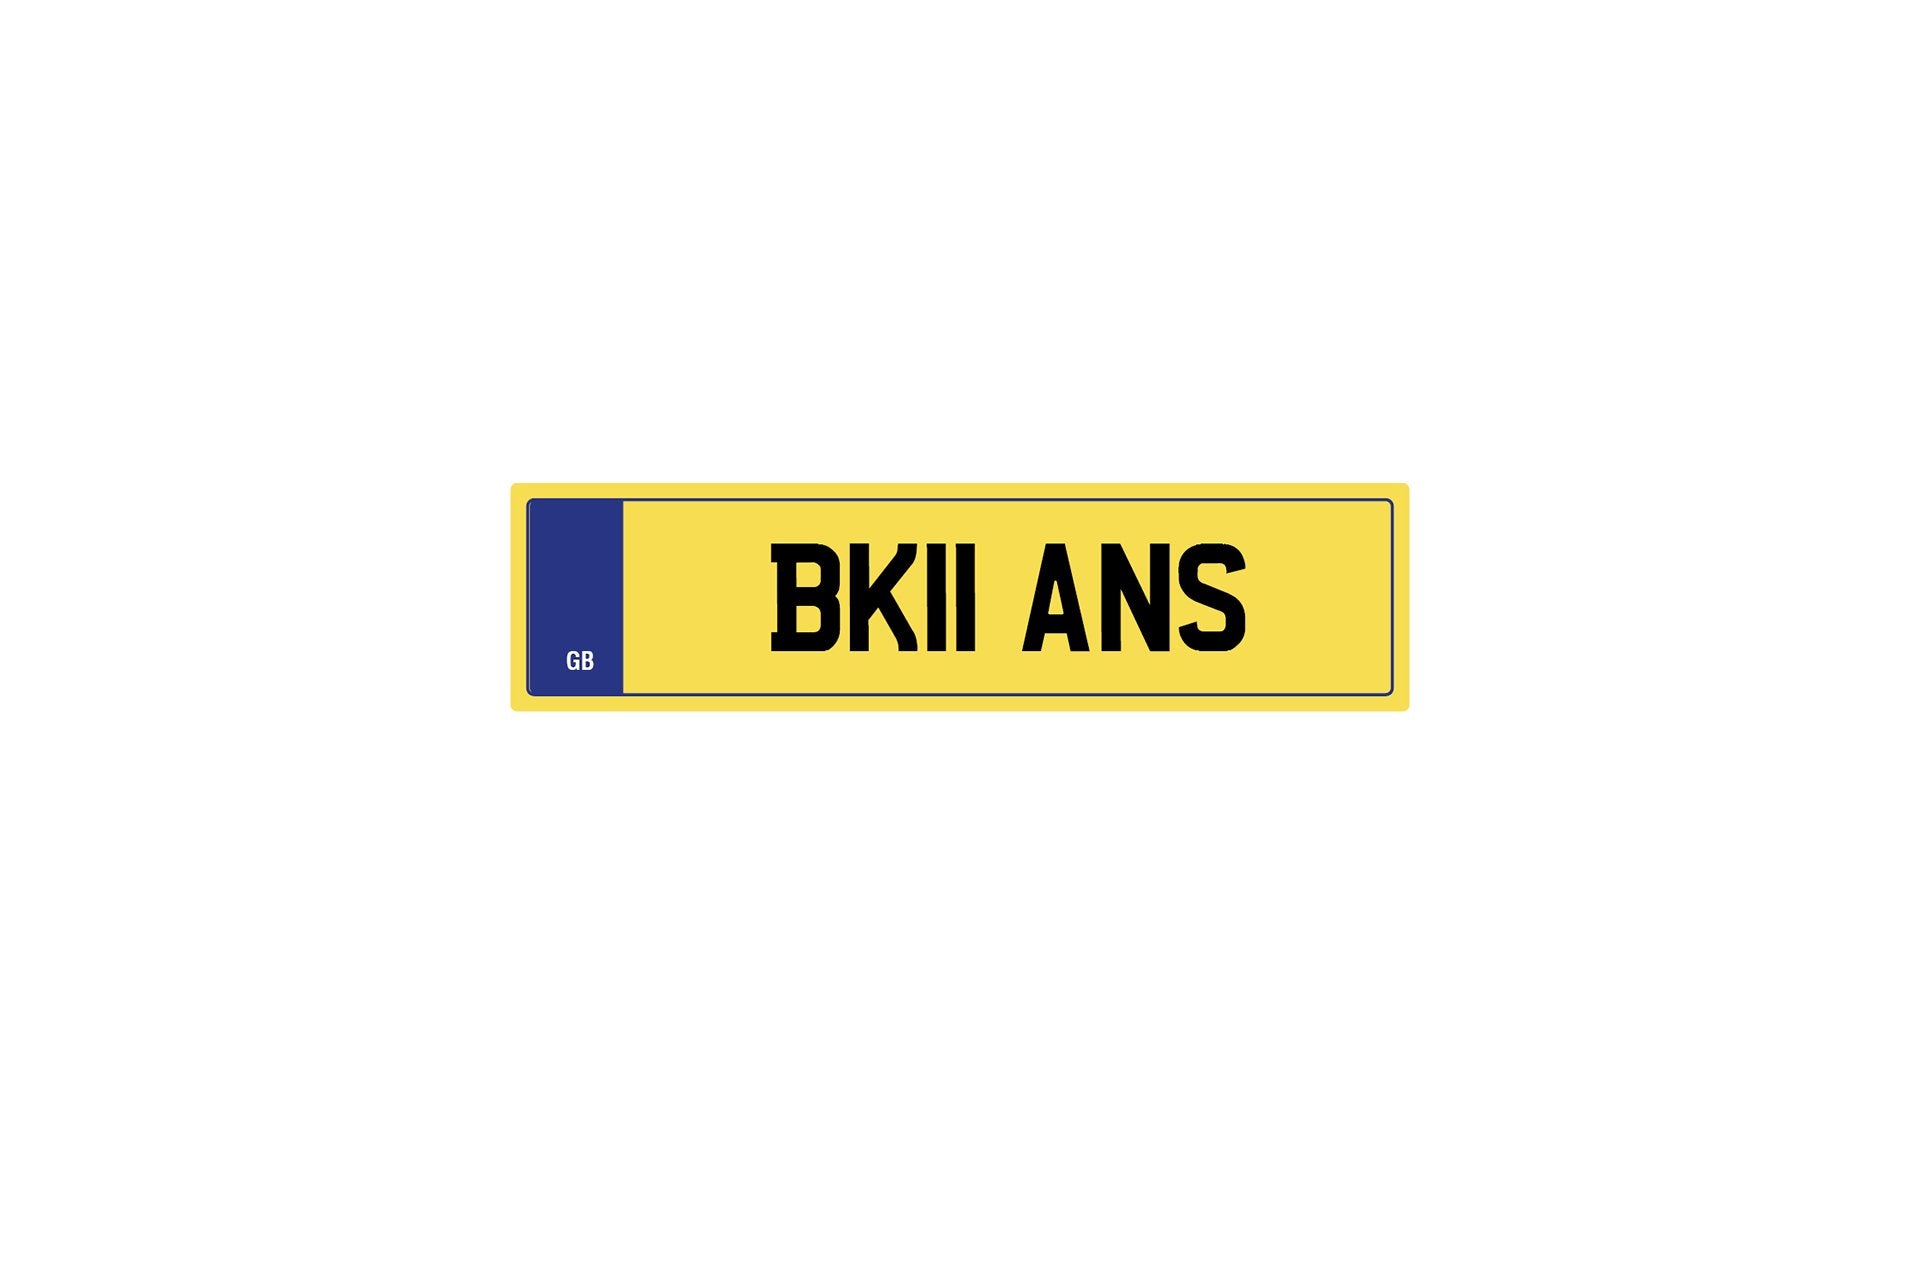 Private Plate Bk11 Ans by Kahn - Image 203